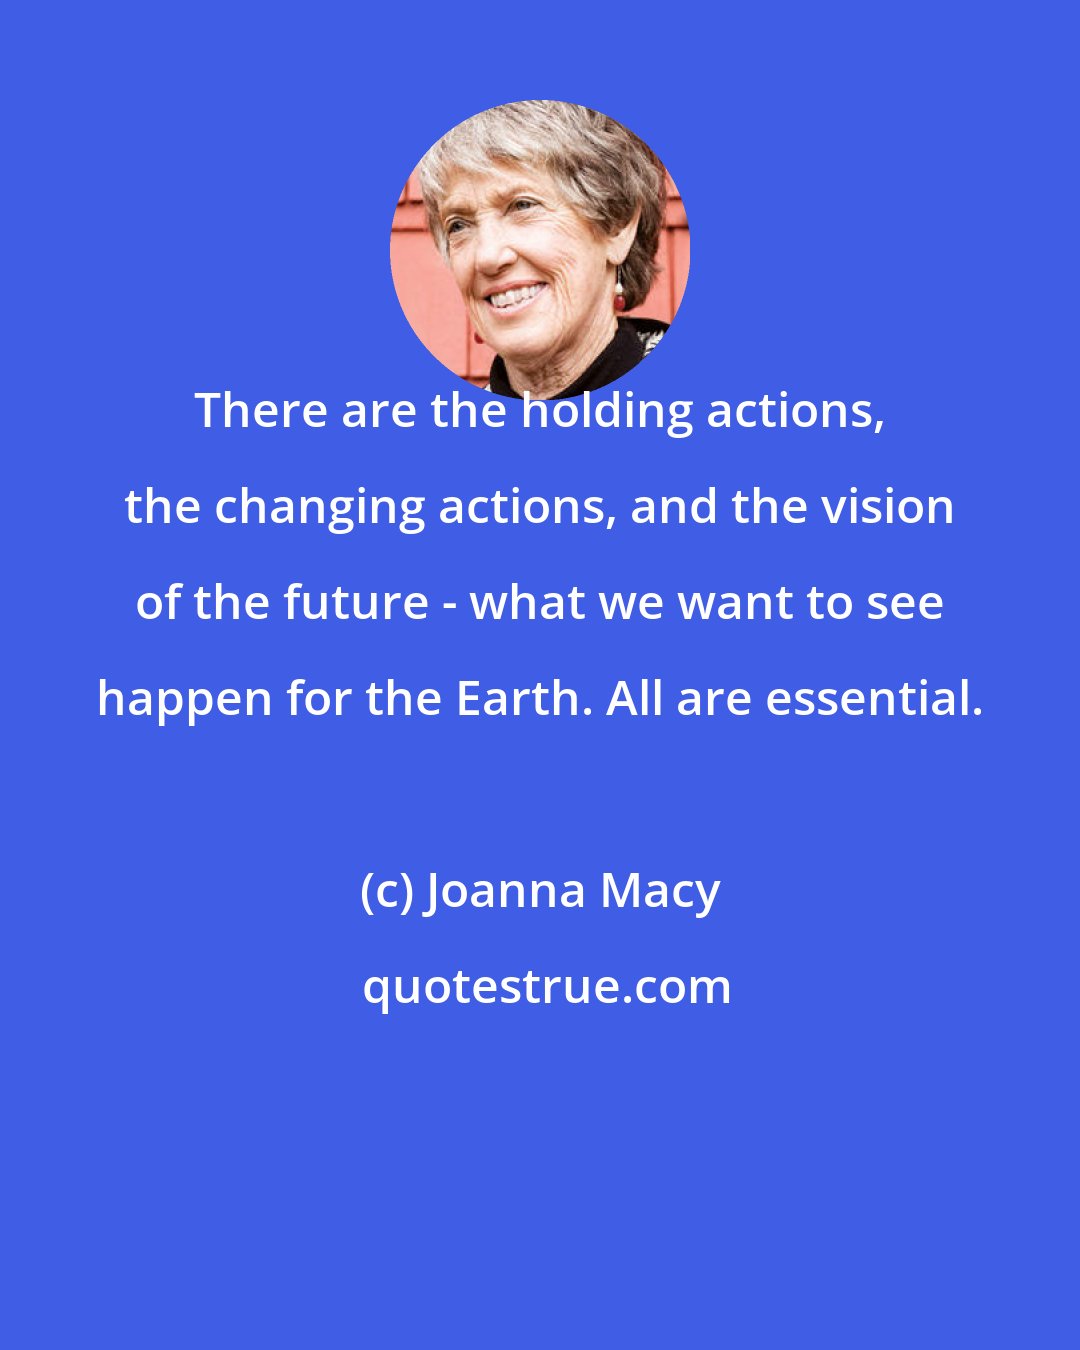 Joanna Macy: There are the holding actions, the changing actions, and the vision of the future - what we want to see happen for the Earth. All are essential.